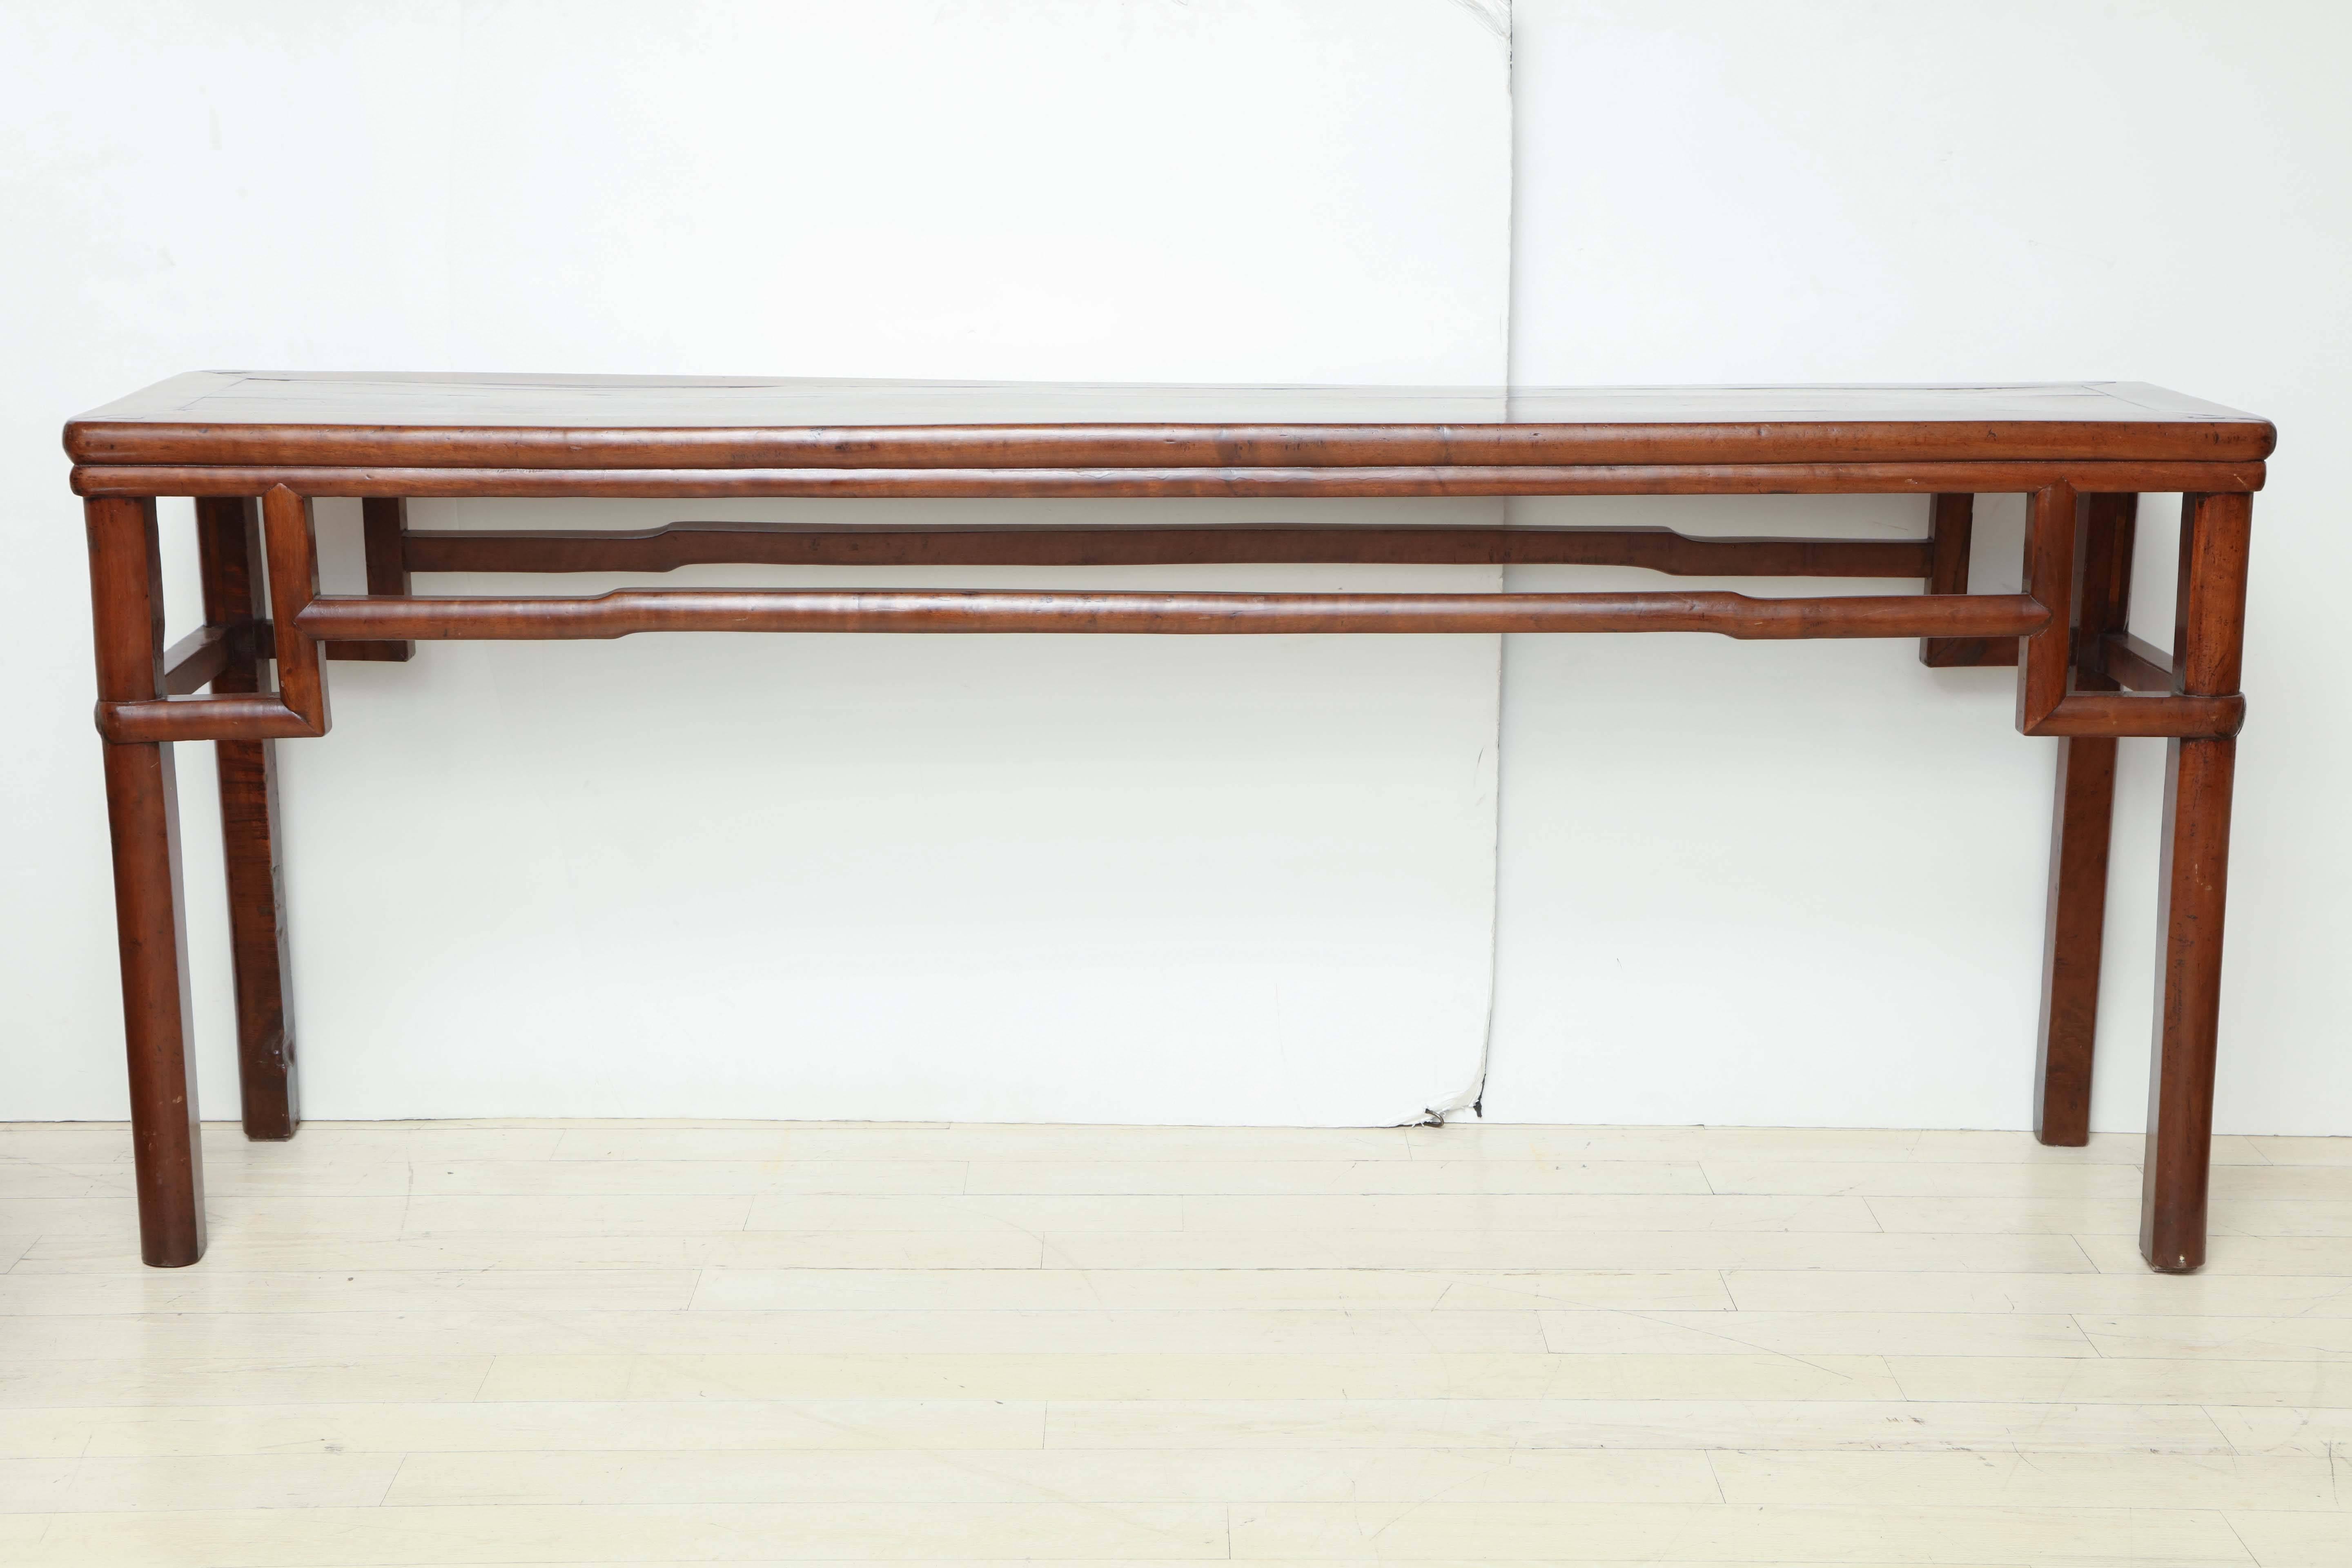 Early 19th century walnut console table with shaped stretcher.

Overall dimensions:
78.5” W, 16.5” D, 32” H.